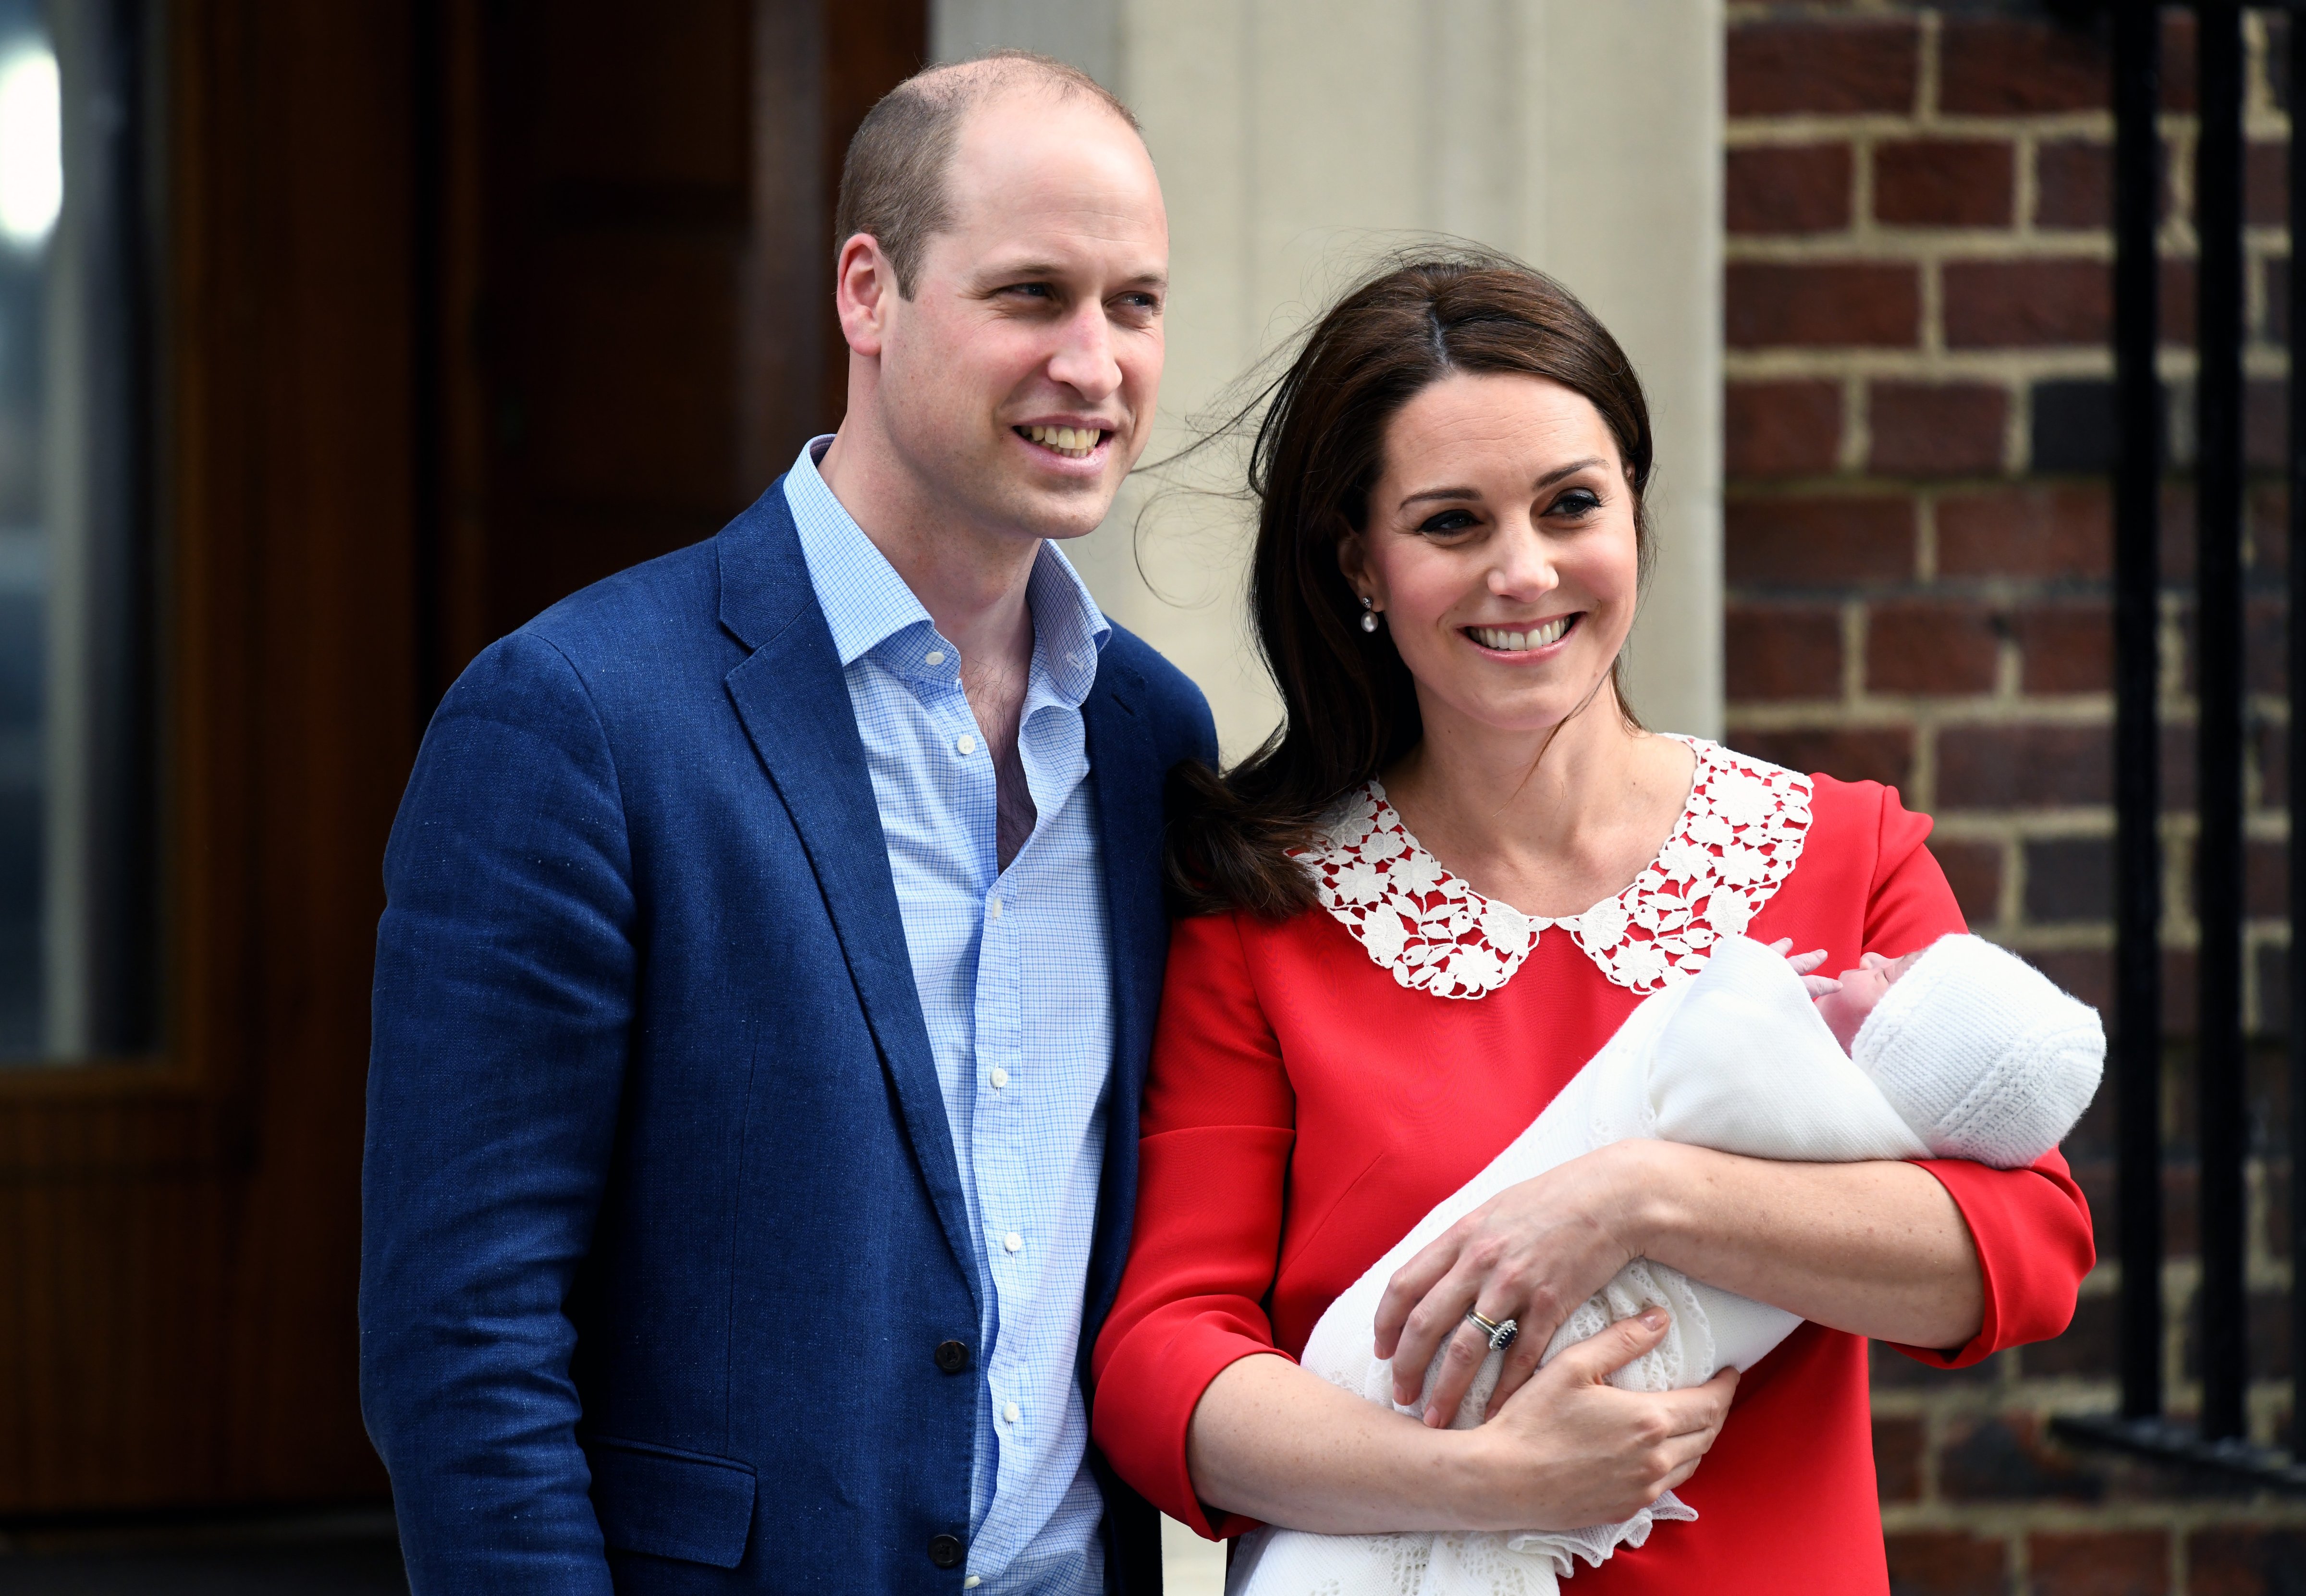 Prince William, Duke of Cambridge and Catherine, Duchess of Cambridge leave St. Mary's Hospital with their newborn son Prince Louis of Cambridge. (Anwar Hussein—WireImage)